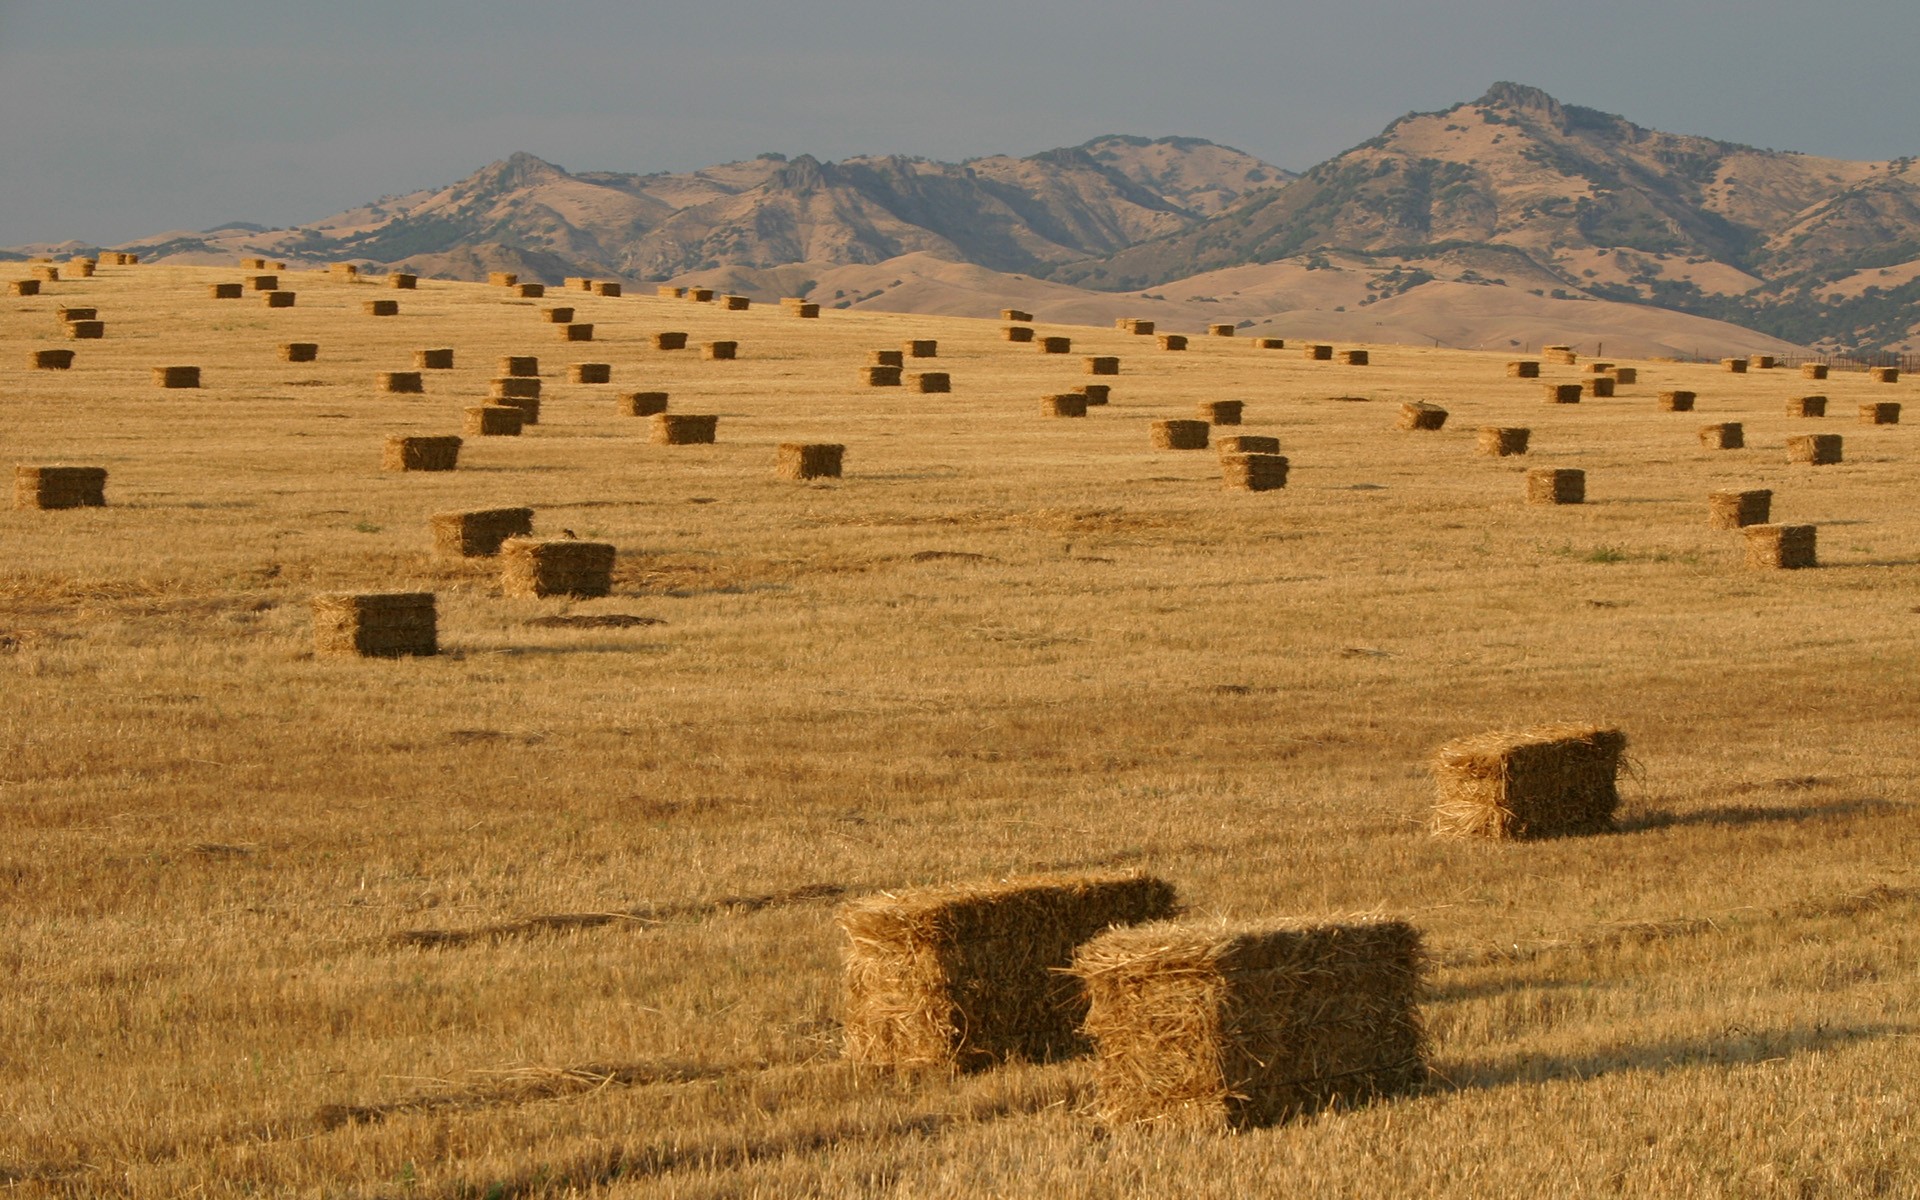 Haystack Royalty Free Stock Images - Image: 203439